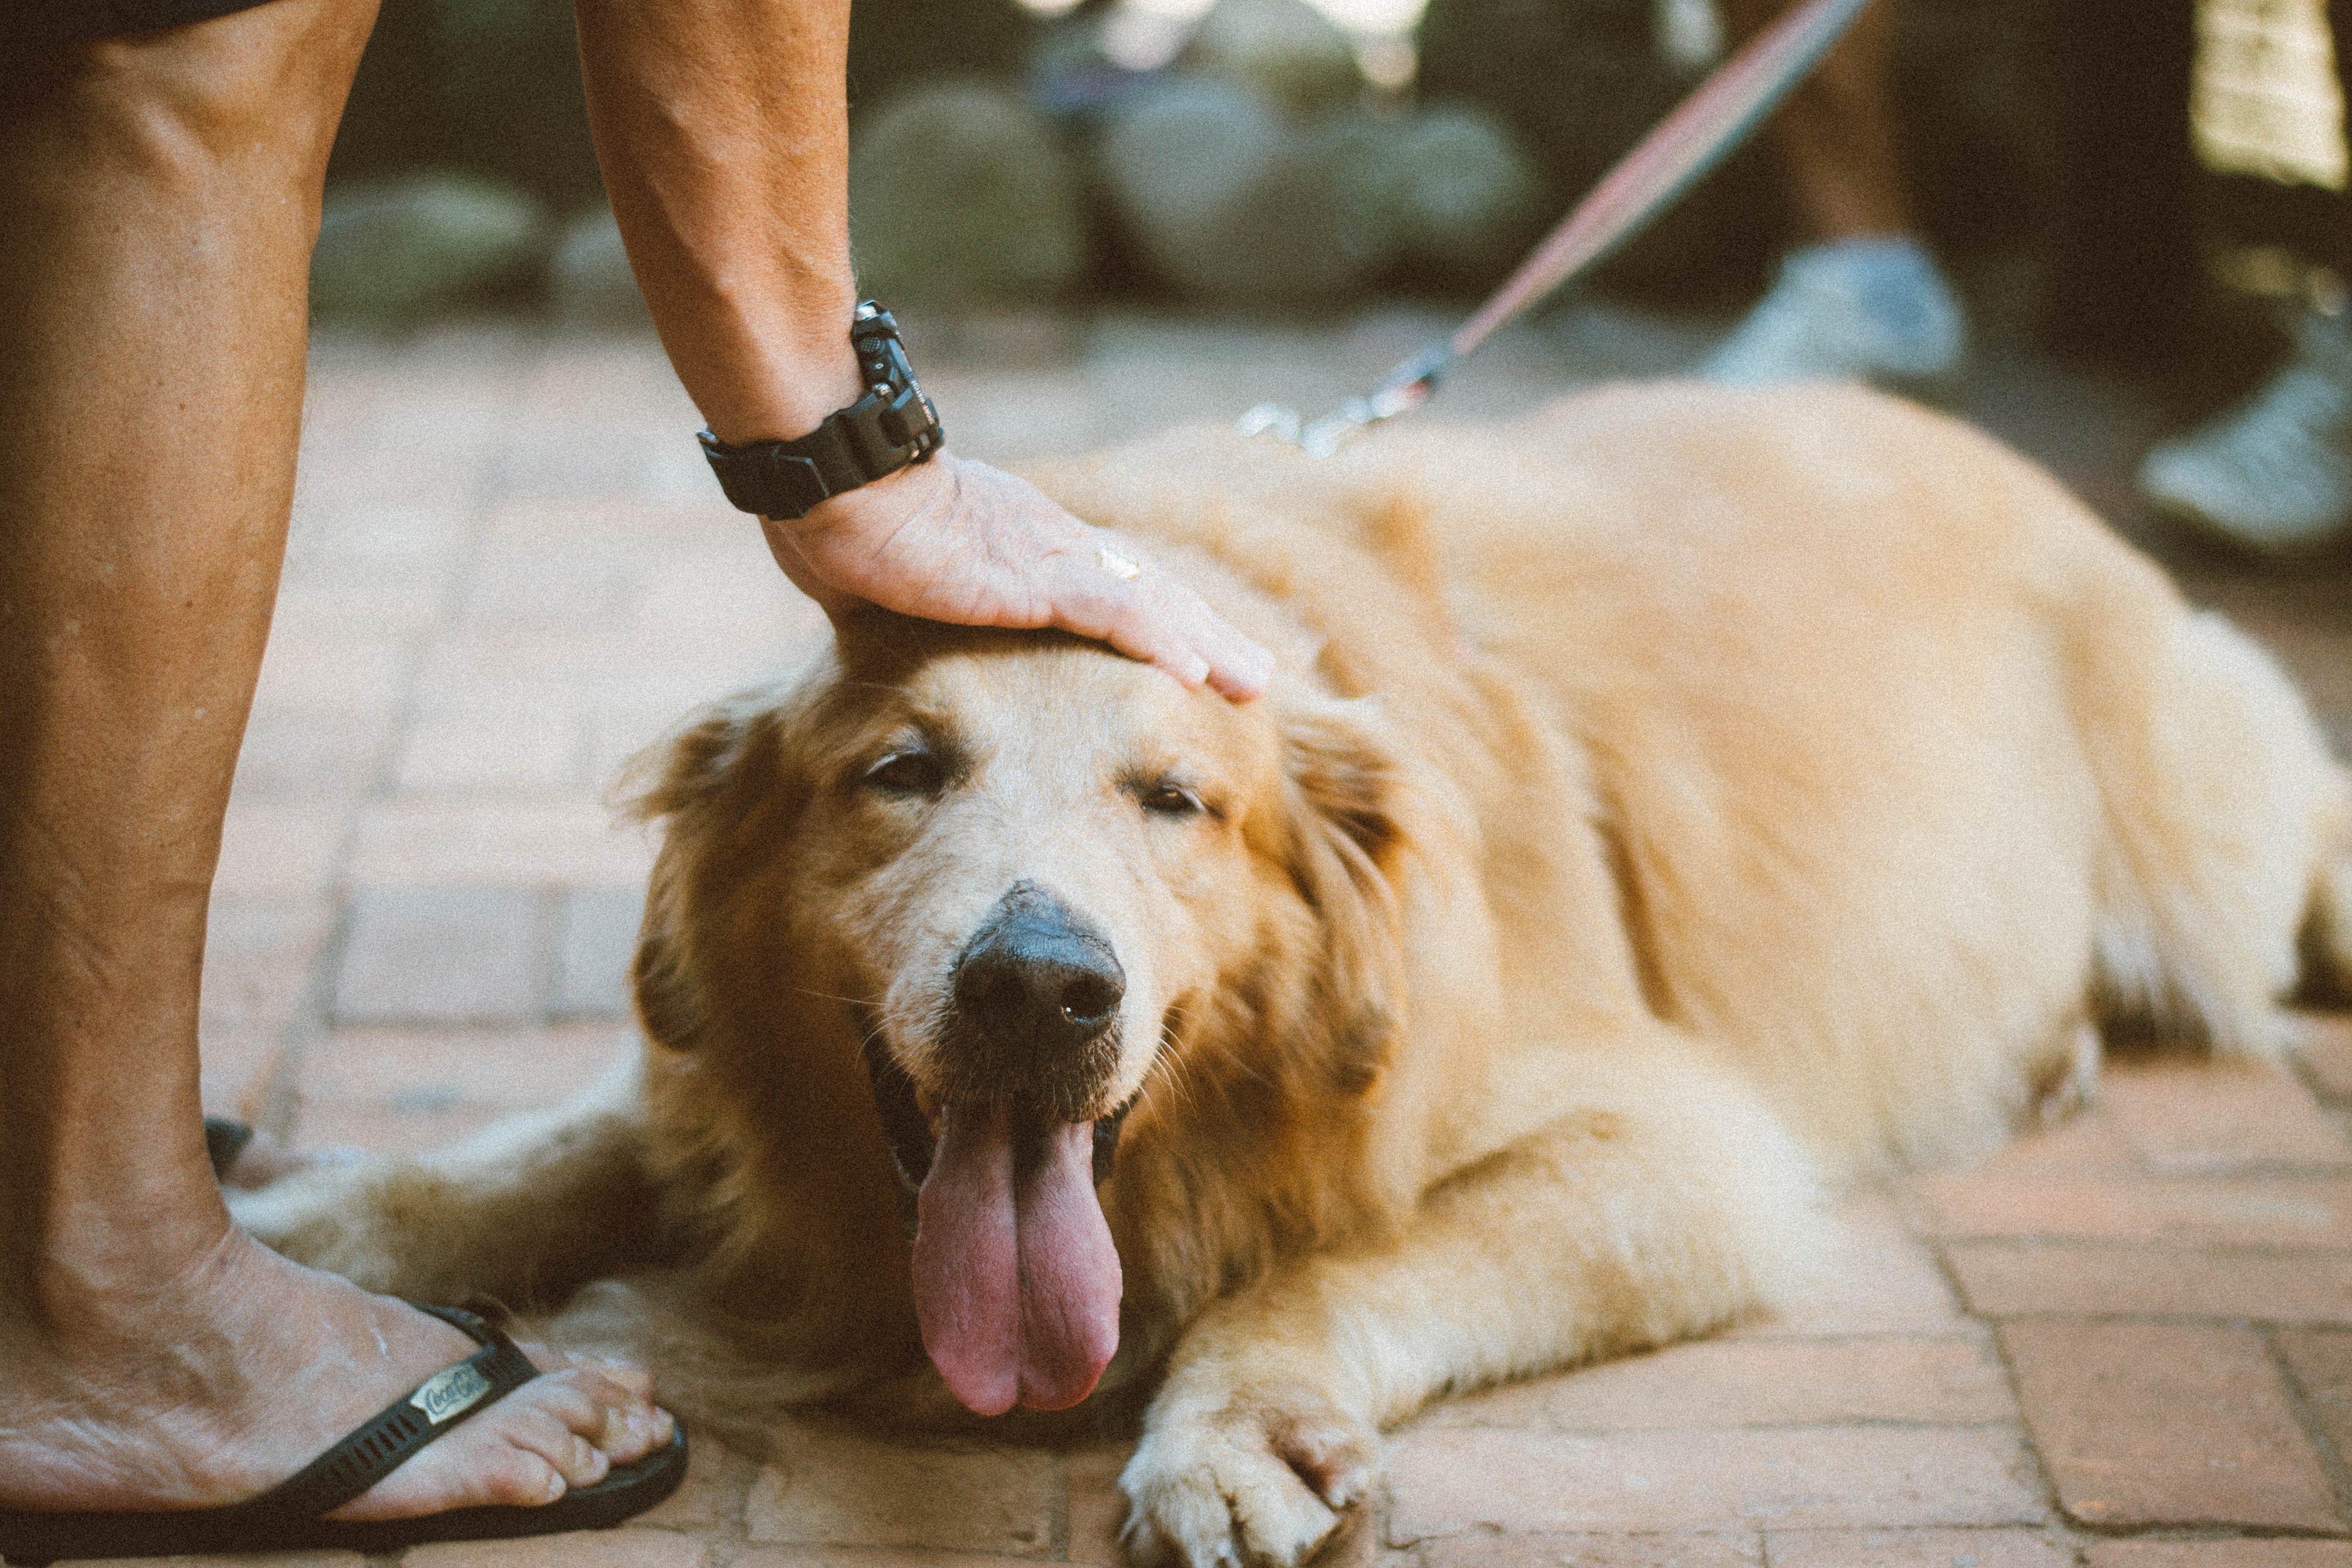 A golden retriever being petted on the head. | Source: Pexels/ Alice Castro